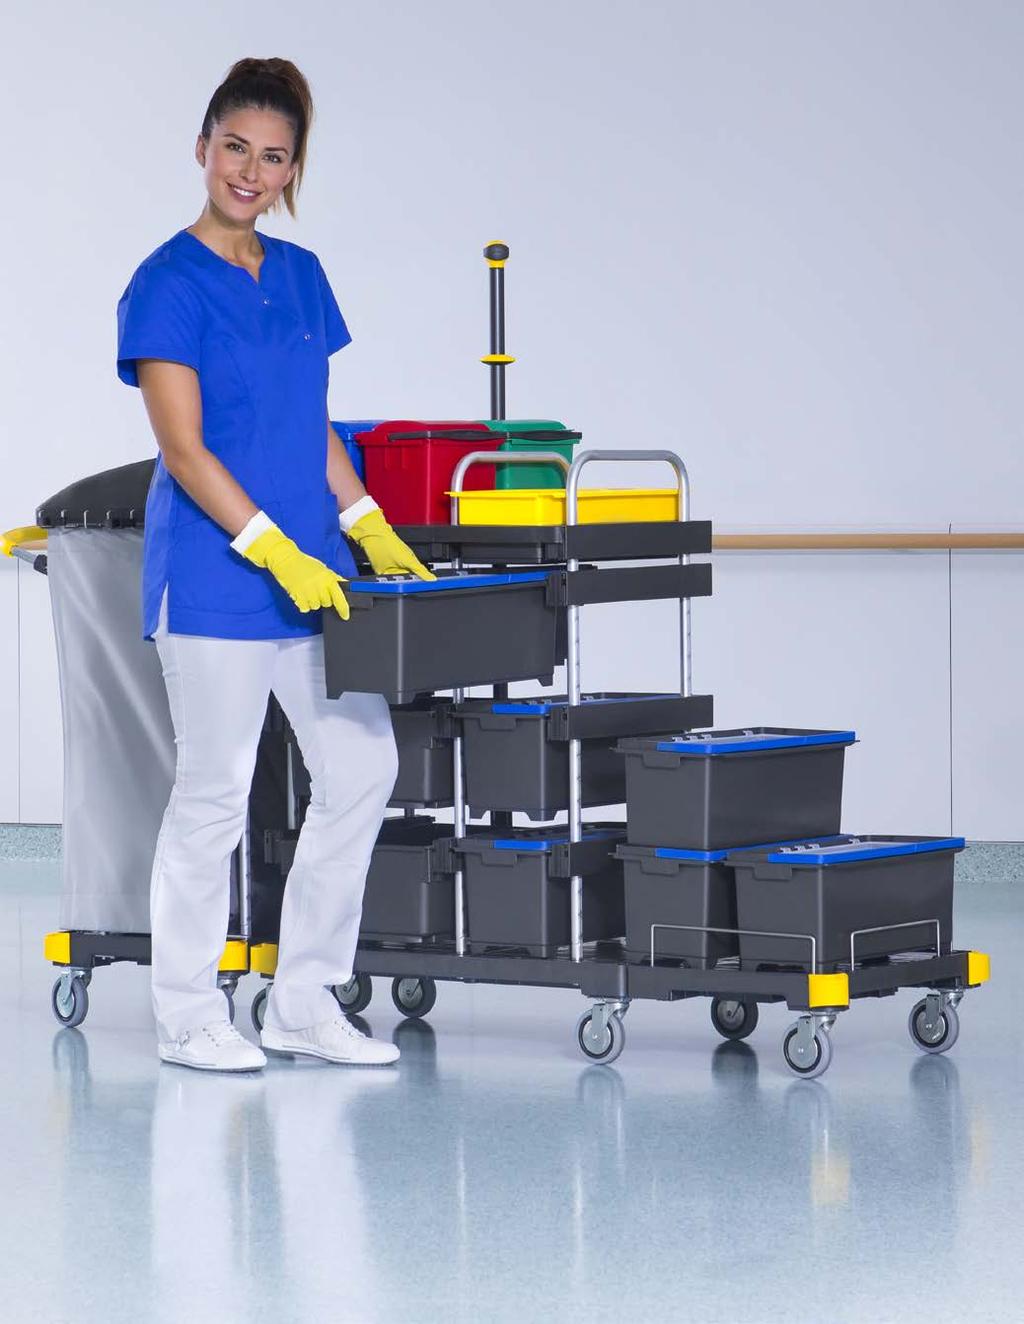 EQUIPE BOX 10 L CLEANING TROLLEYS EQUIPE BOX 10 L The compact model Contactless Hygienic Safe: The 10 l box allows you to work contactless.